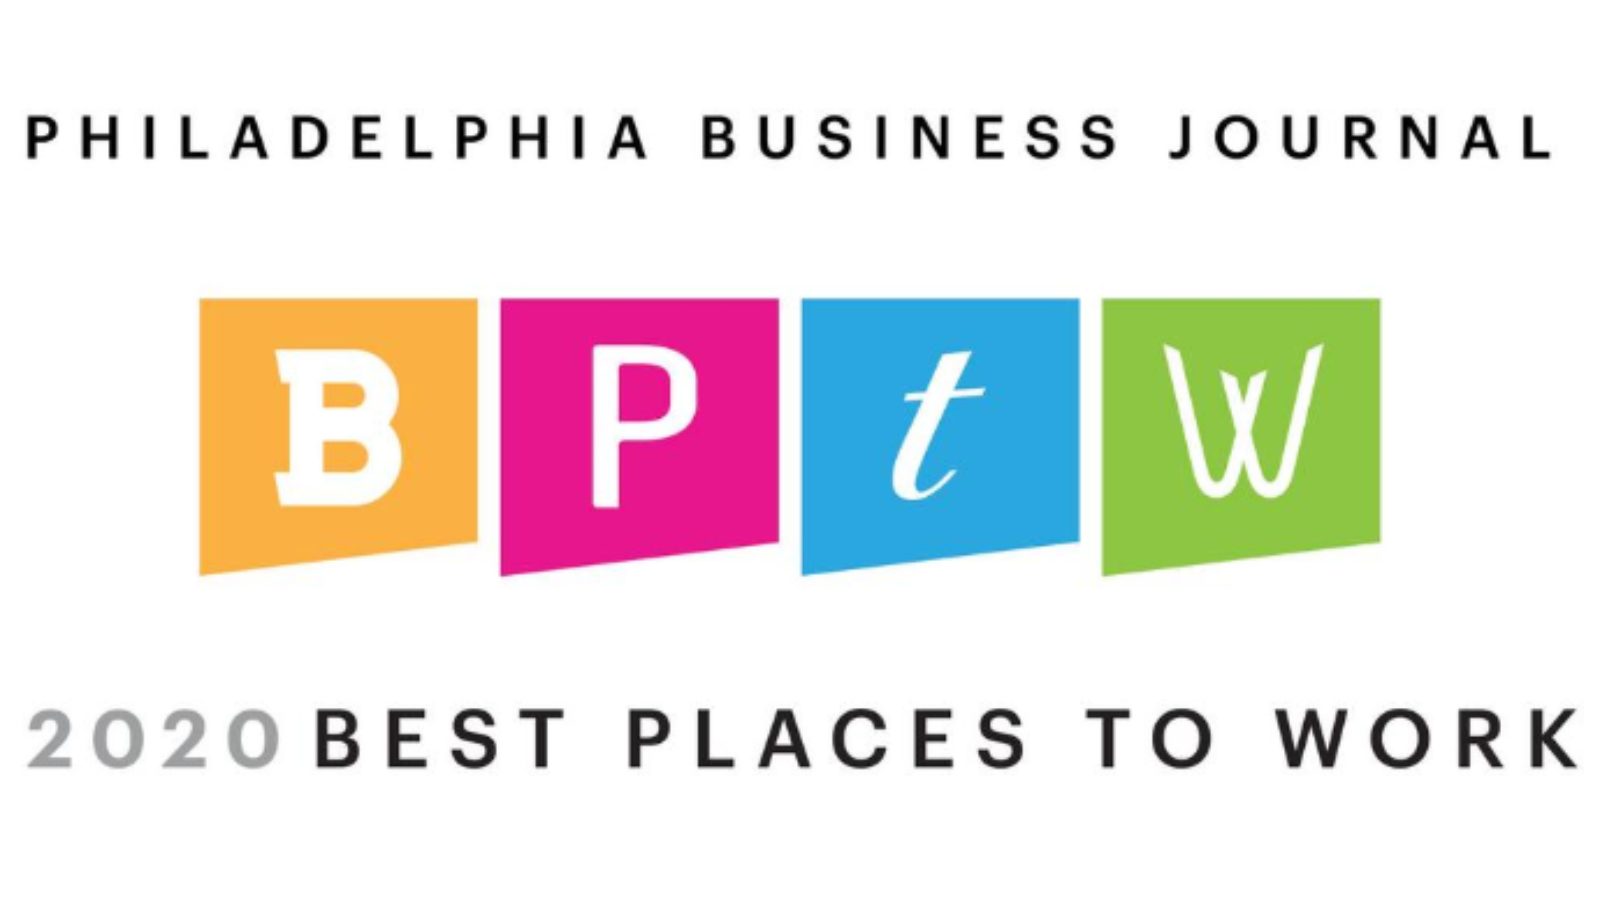 Logo: Philadelphia Business Journal in black text and the letters BPTW in colorful blocks (orange, pink, blue and green)